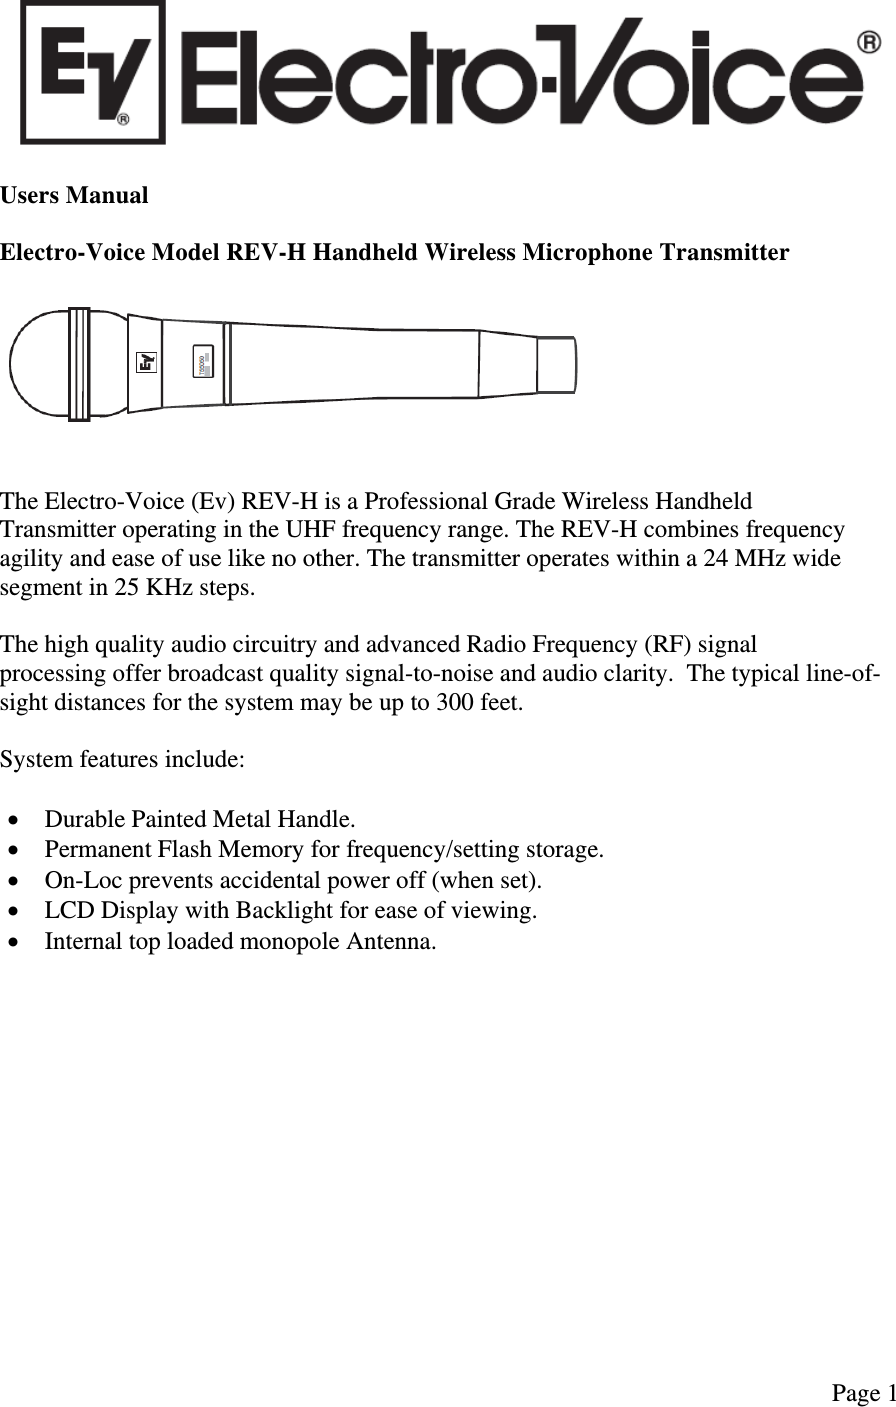   Page 1   Users Manual  Electro-Voice Model REV-H Handheld Wireless Microphone Transmitter      The Electro-Voice (Ev) REV-H is a Professional Grade Wireless Handheld Transmitter operating in the UHF frequency range. The REV-H combines frequency agility and ease of use like no other. The transmitter operates within a 24 MHz wide segment in 25 KHz steps.  The high quality audio circuitry and advanced Radio Frequency (RF) signal processing offer broadcast quality signal-to-noise and audio clarity.  The typical line-of-sight distances for the system may be up to 300 feet.  System features include:   Durable Painted Metal Handle.  Permanent Flash Memory for frequency/setting storage.  On-Loc prevents accidental power off (when set).  LCD Display with Backlight for ease of viewing.  Internal top loaded monopole Antenna.                